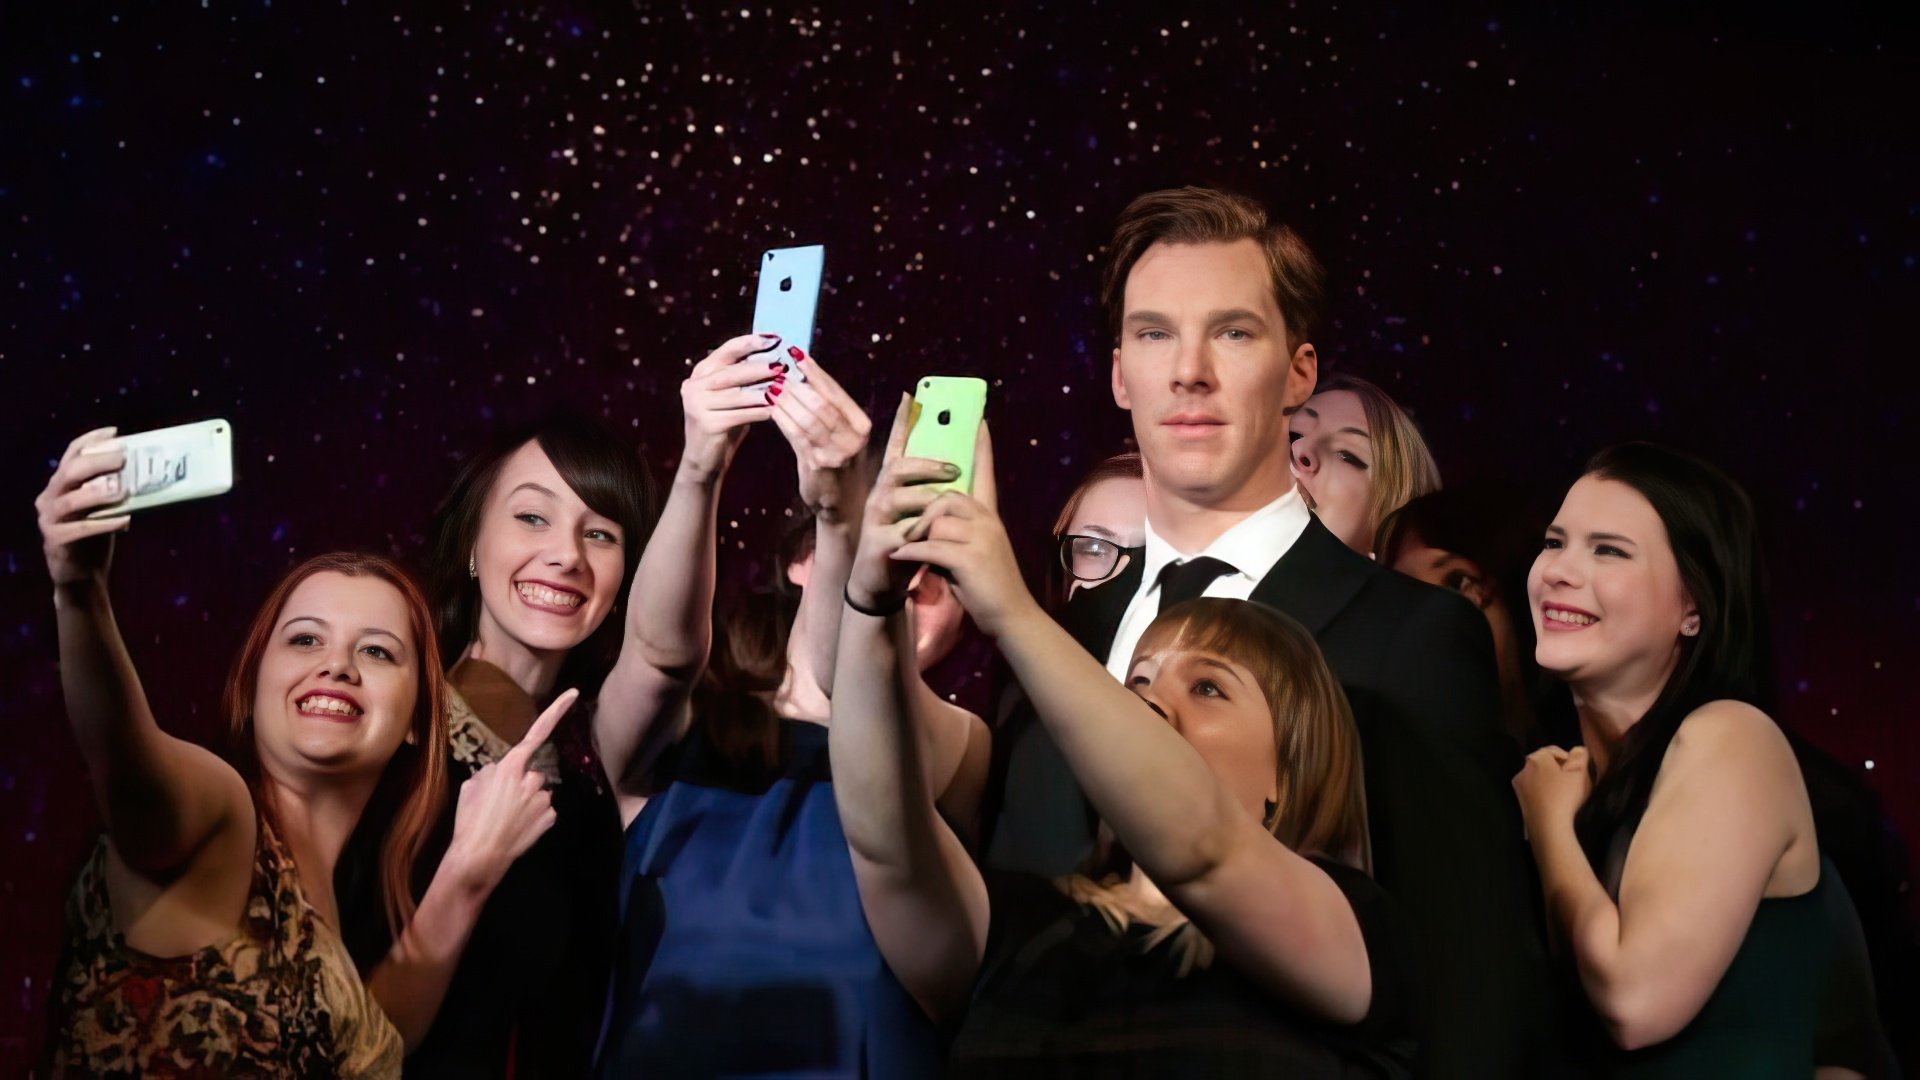 The role of Sherlock turned Benedict Cumberbatch into a global superstar